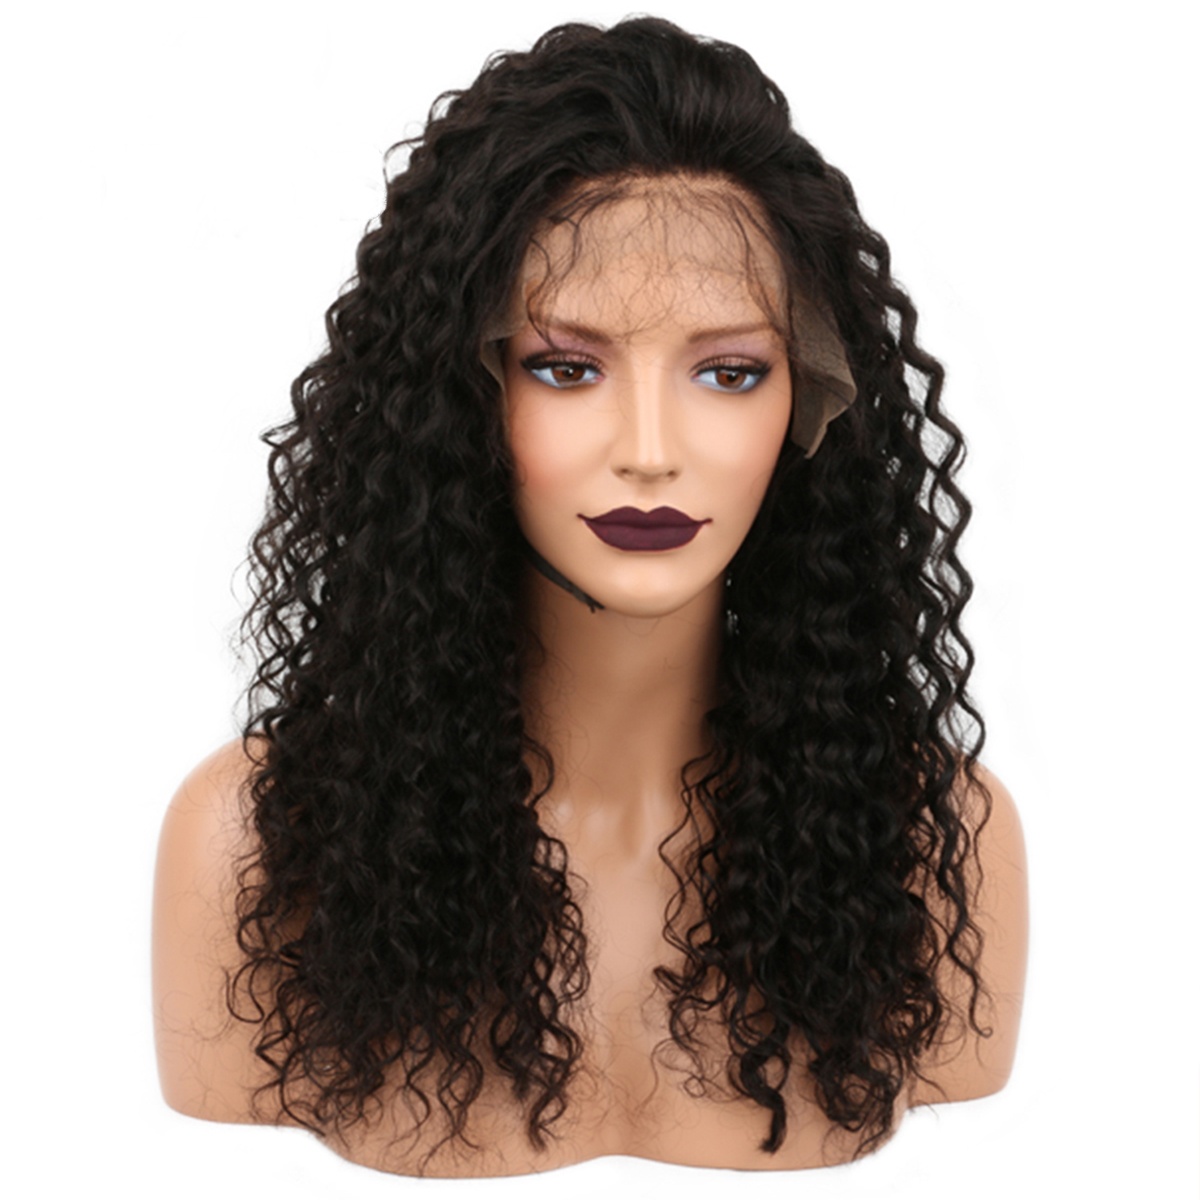 ISABEL Full Lace Human Hair Wigs With Baby Hair Brazilian Virgin Kinky Curly Wigs For Black Women